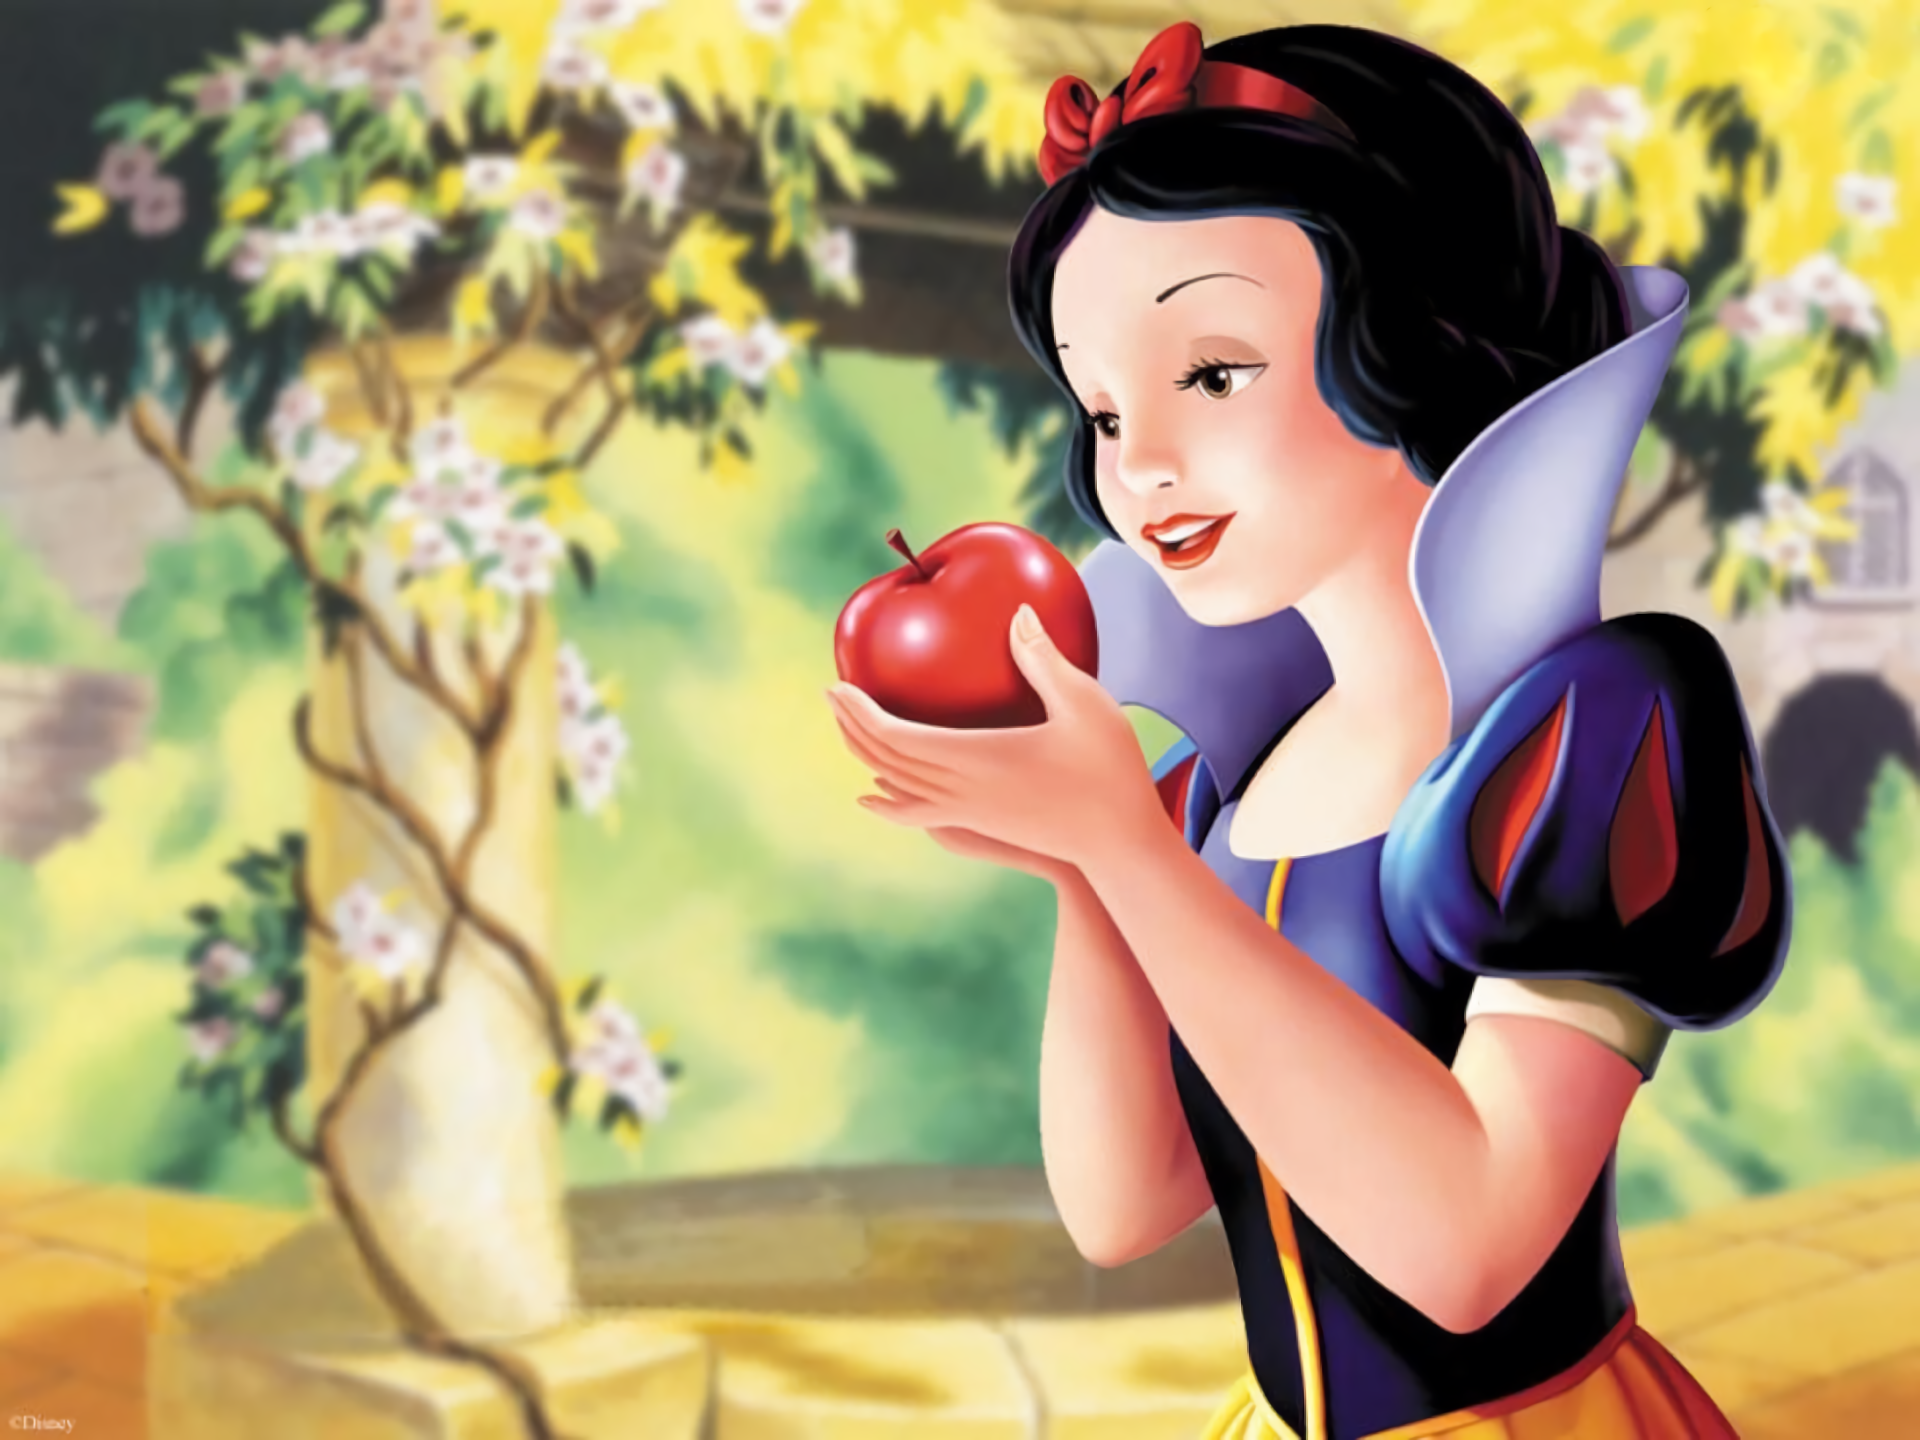 Snow White Iphone Background by LullabySoul91 on DeviantArt